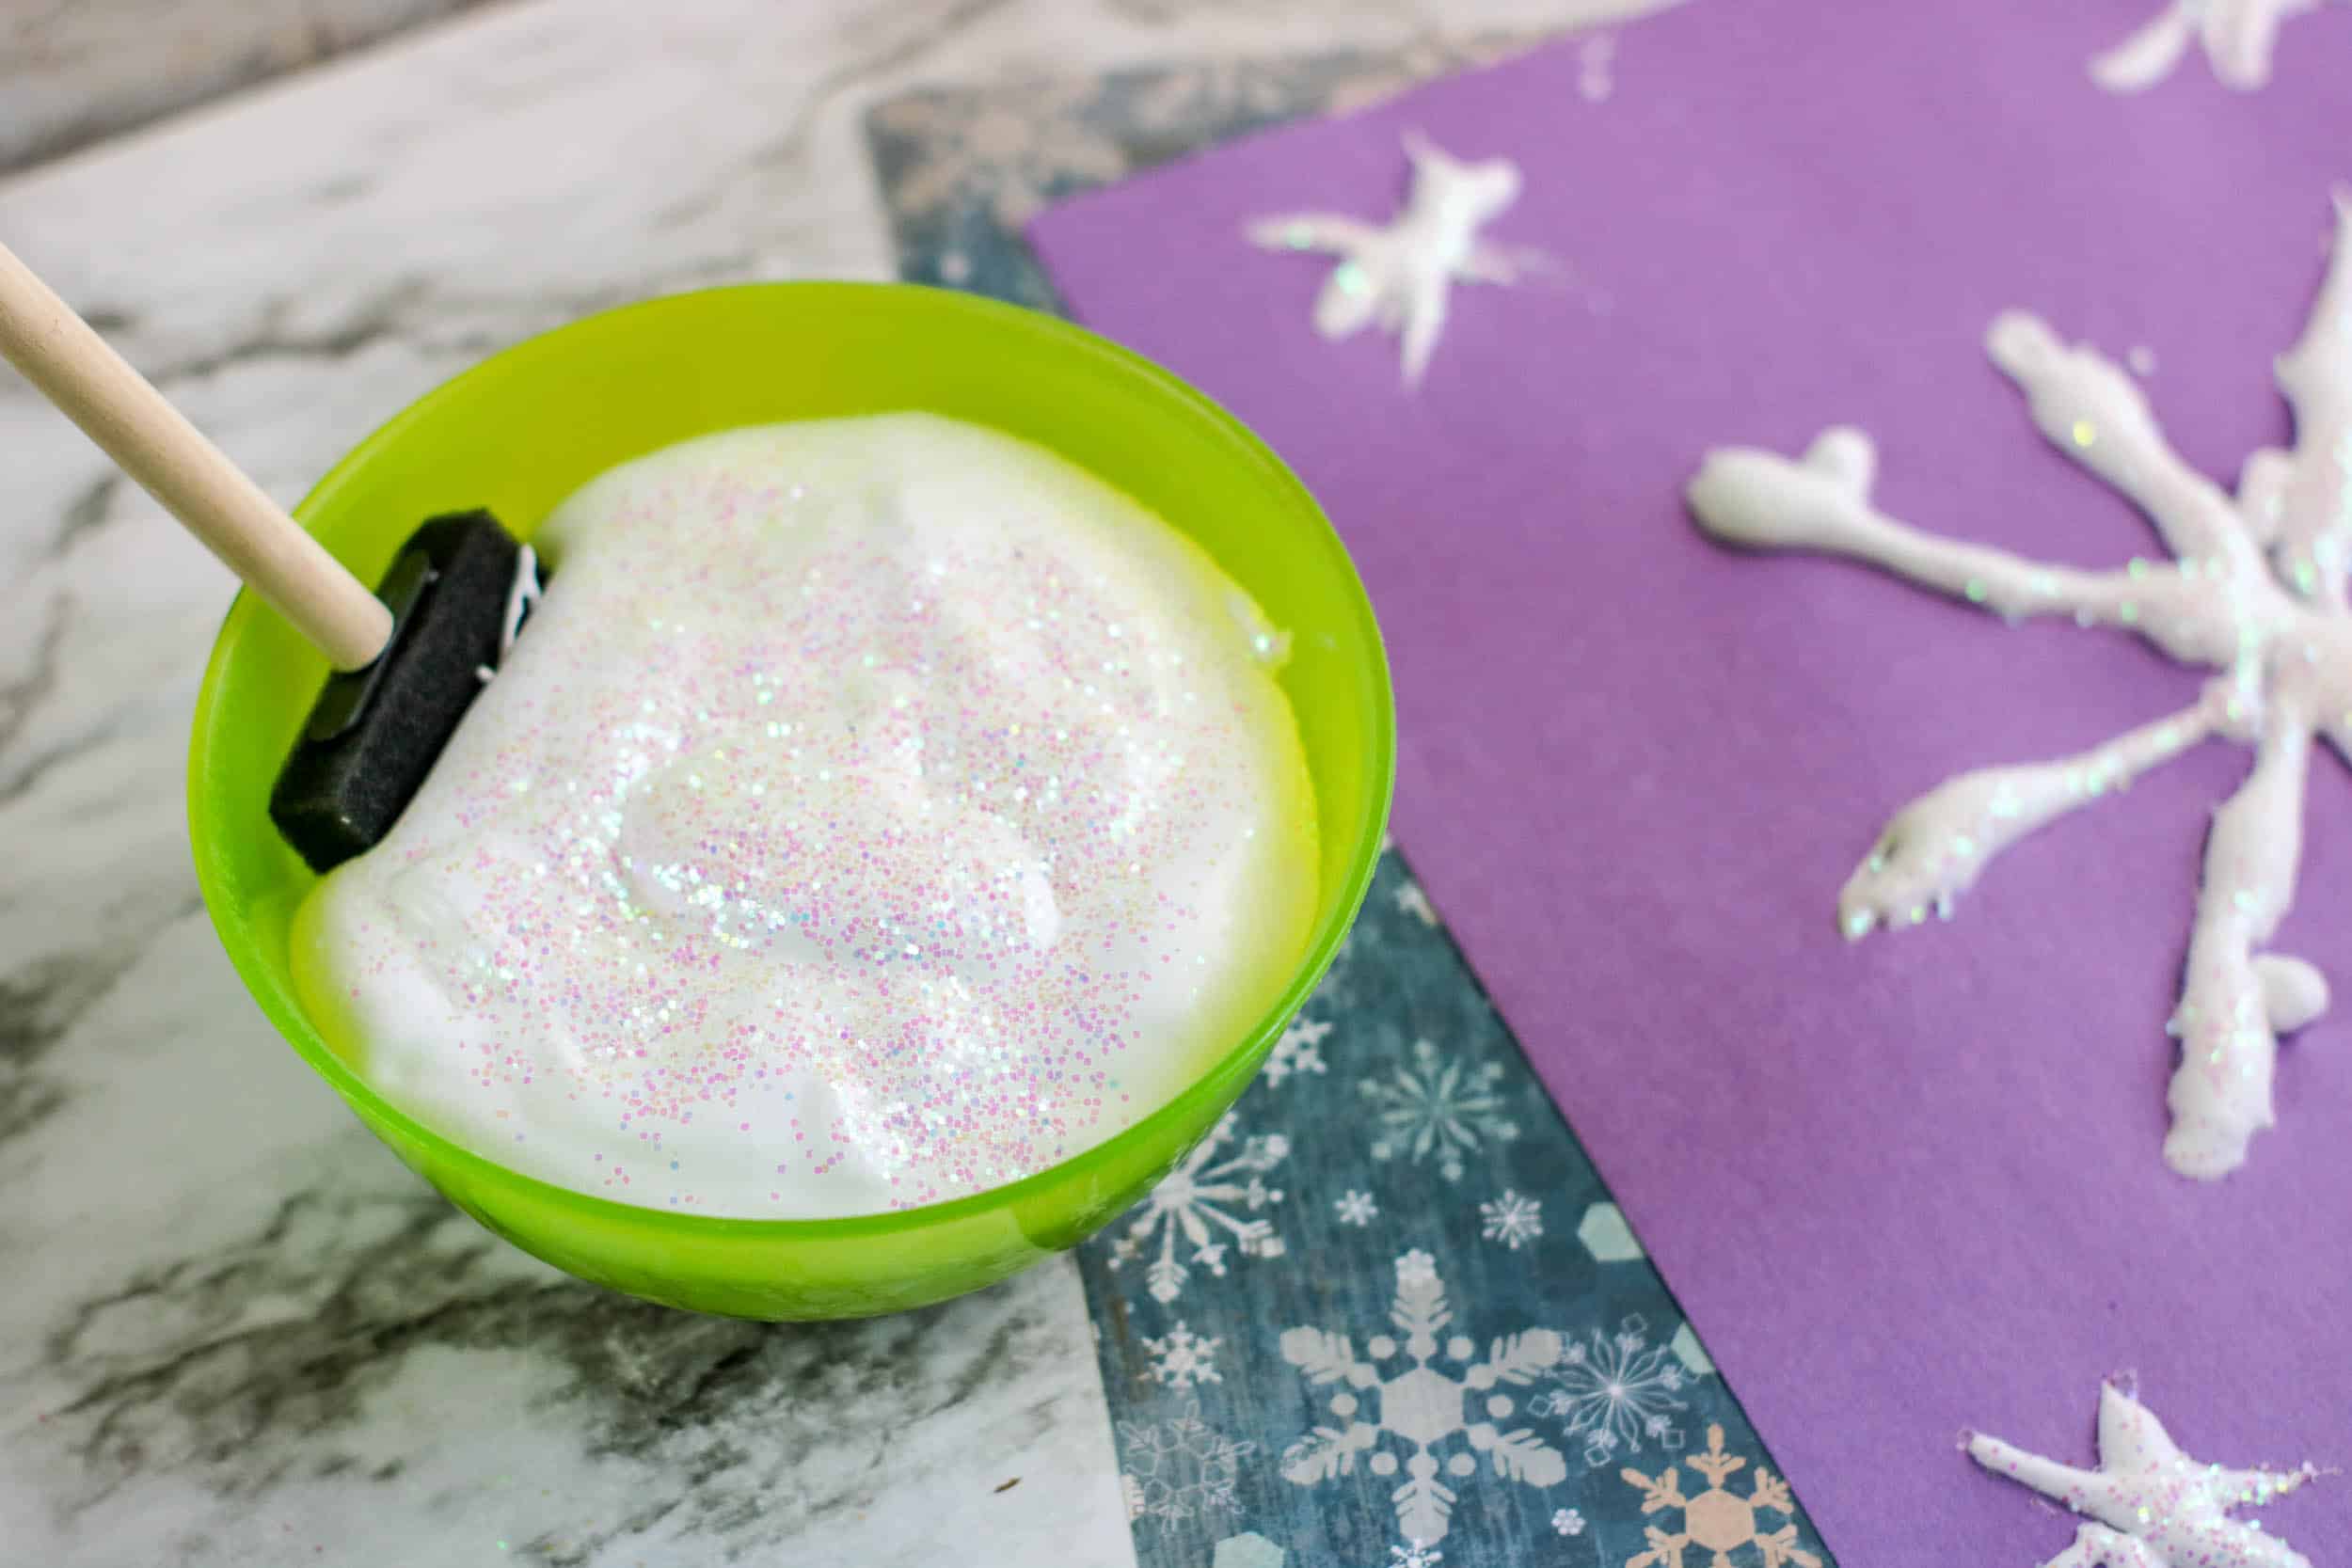 How to make fun and sparkly snow paint